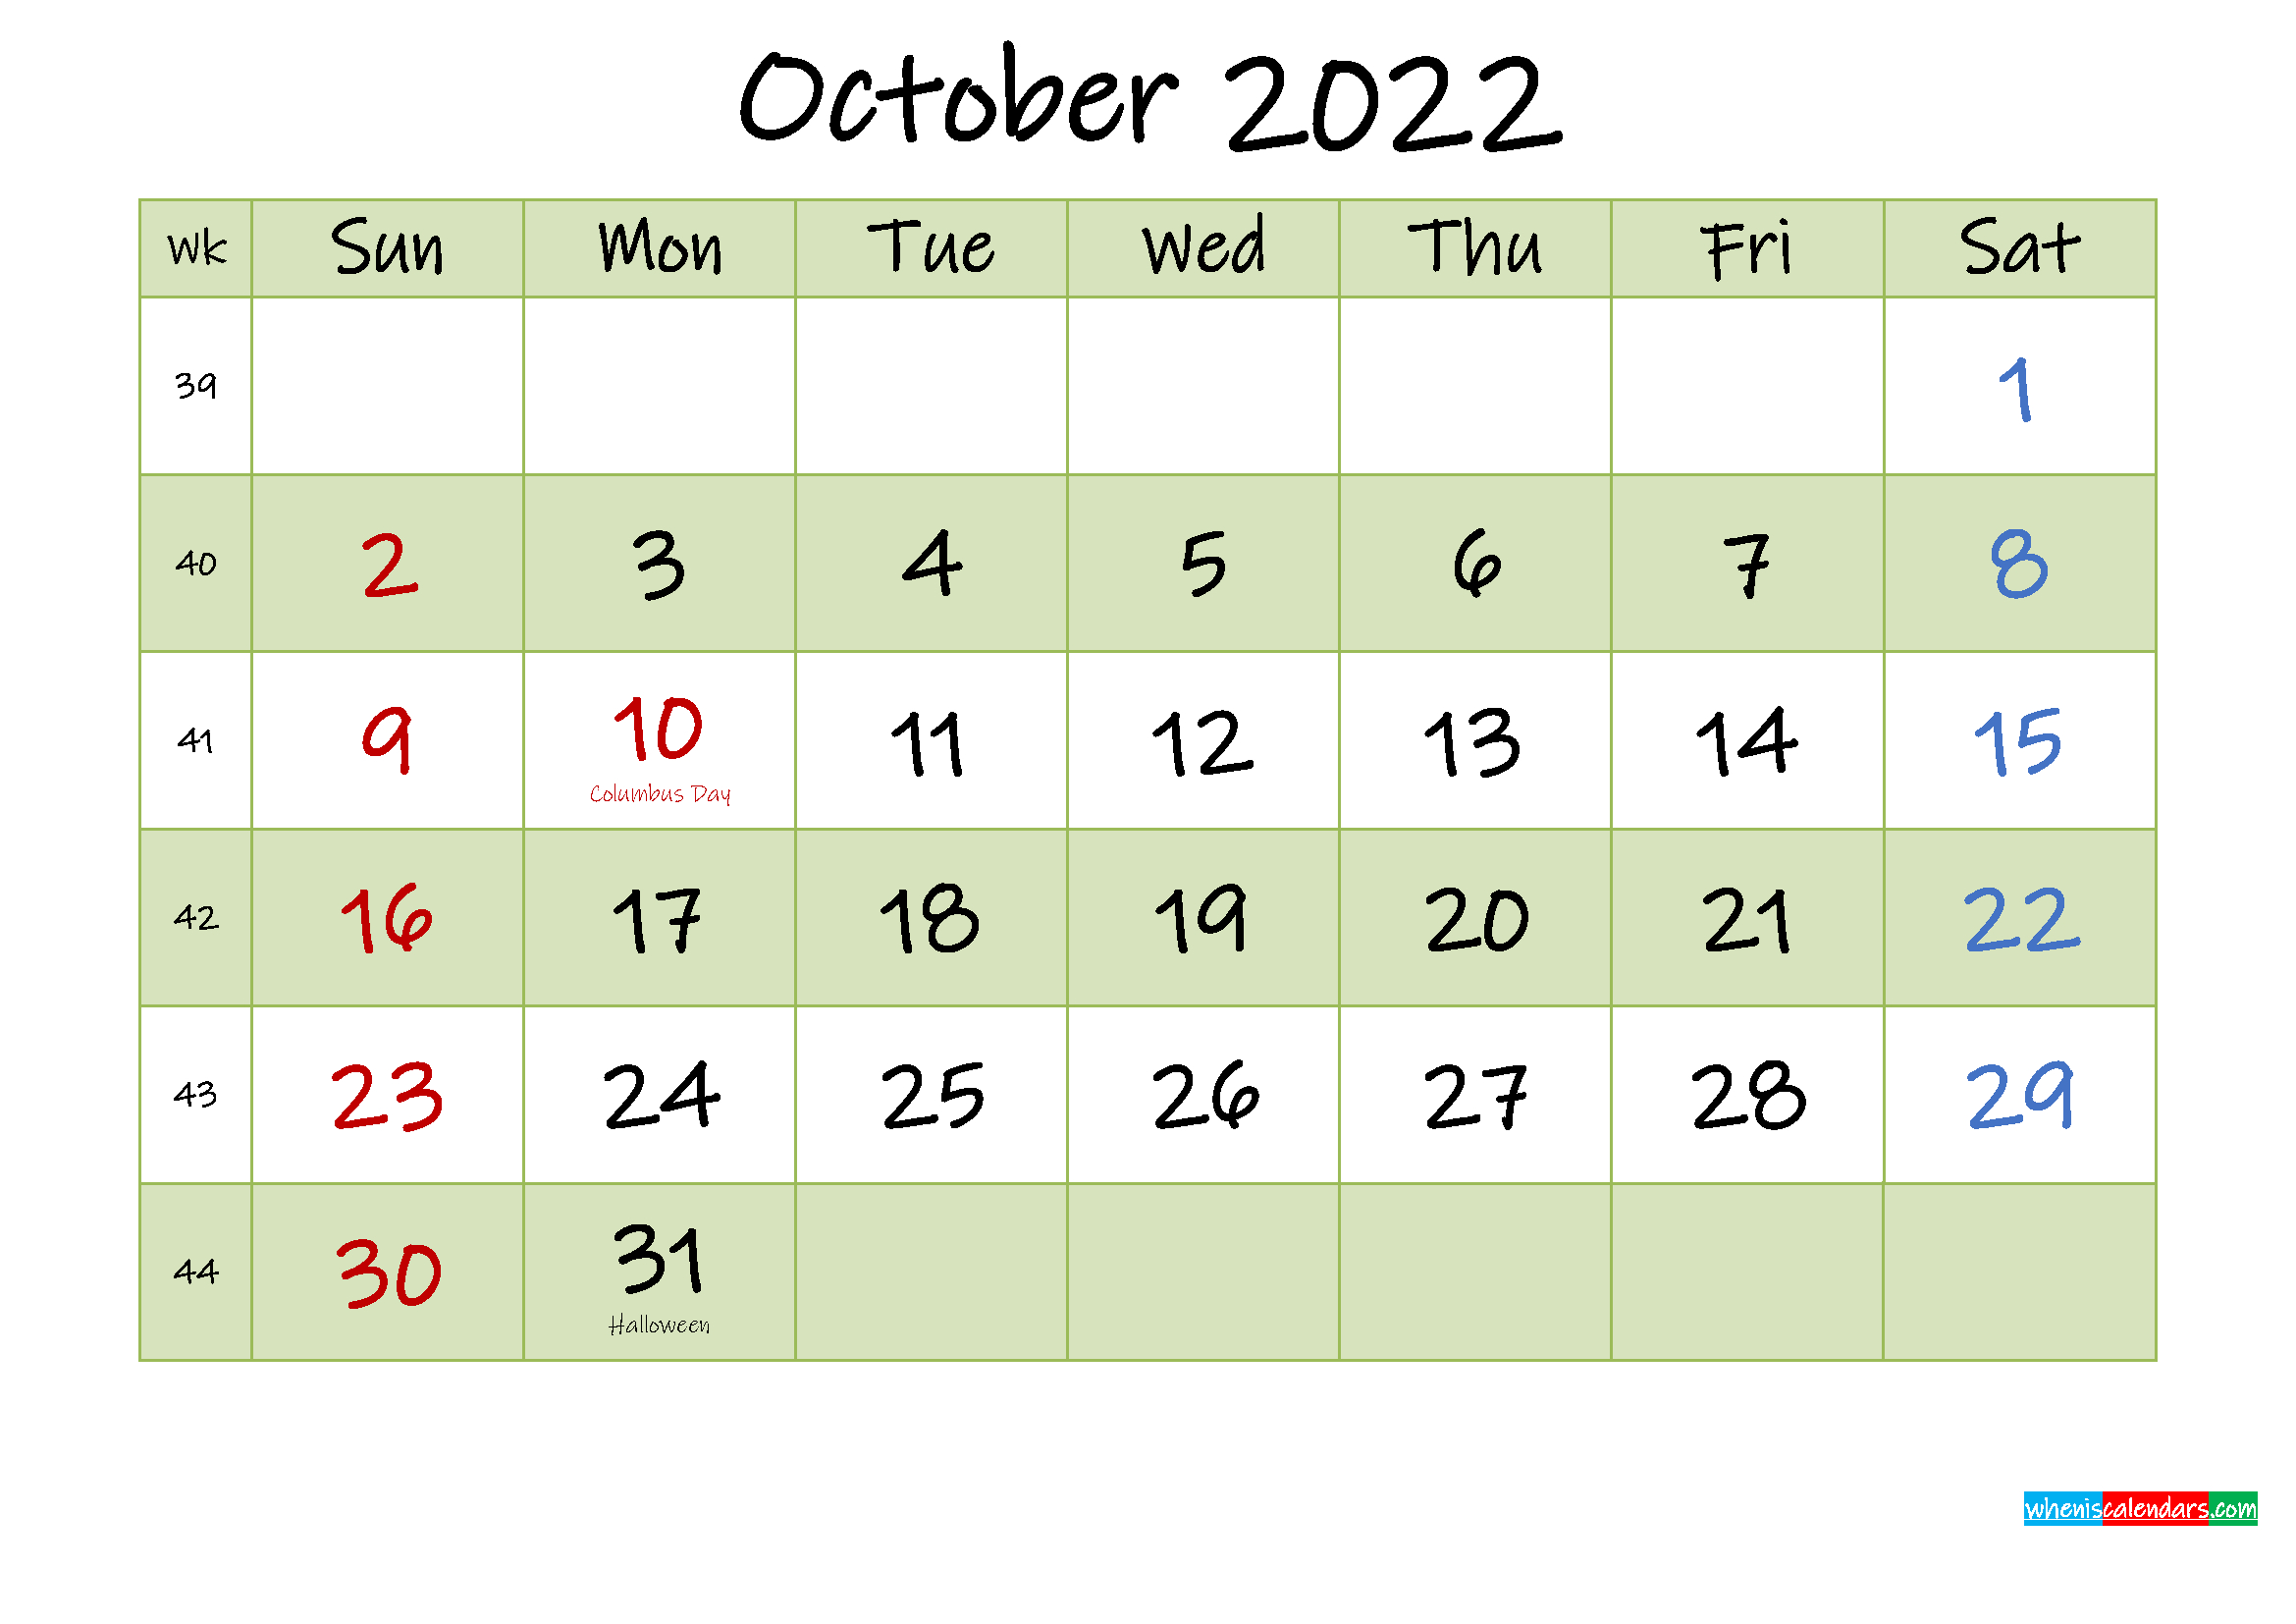 October 2022 Calendar With Holidays Printable - Template